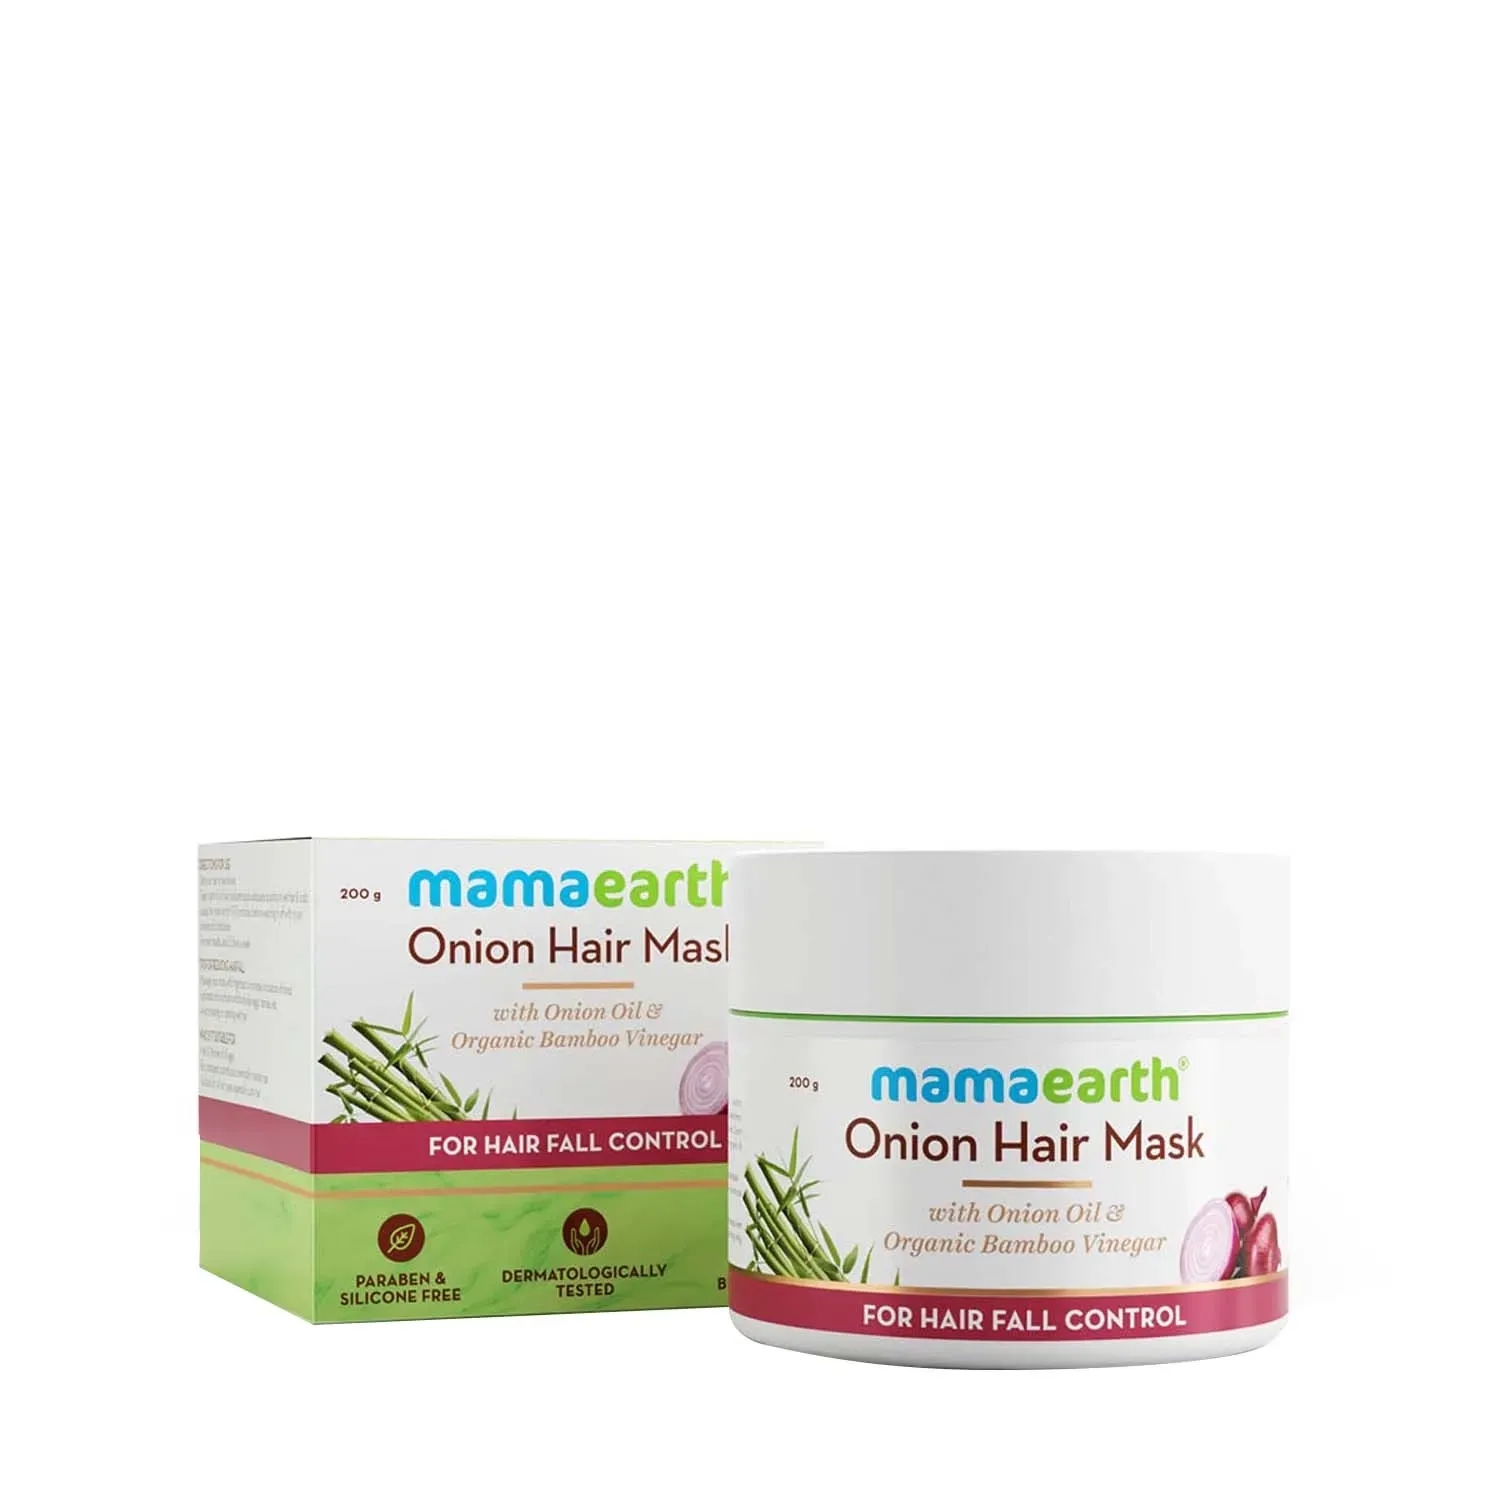 Mamaearth Onion Hair Serum  Onion Hair Mask Buy Indian Products Online   RaffeldealsRaffelDeals  Buy Indias Best Collections Online